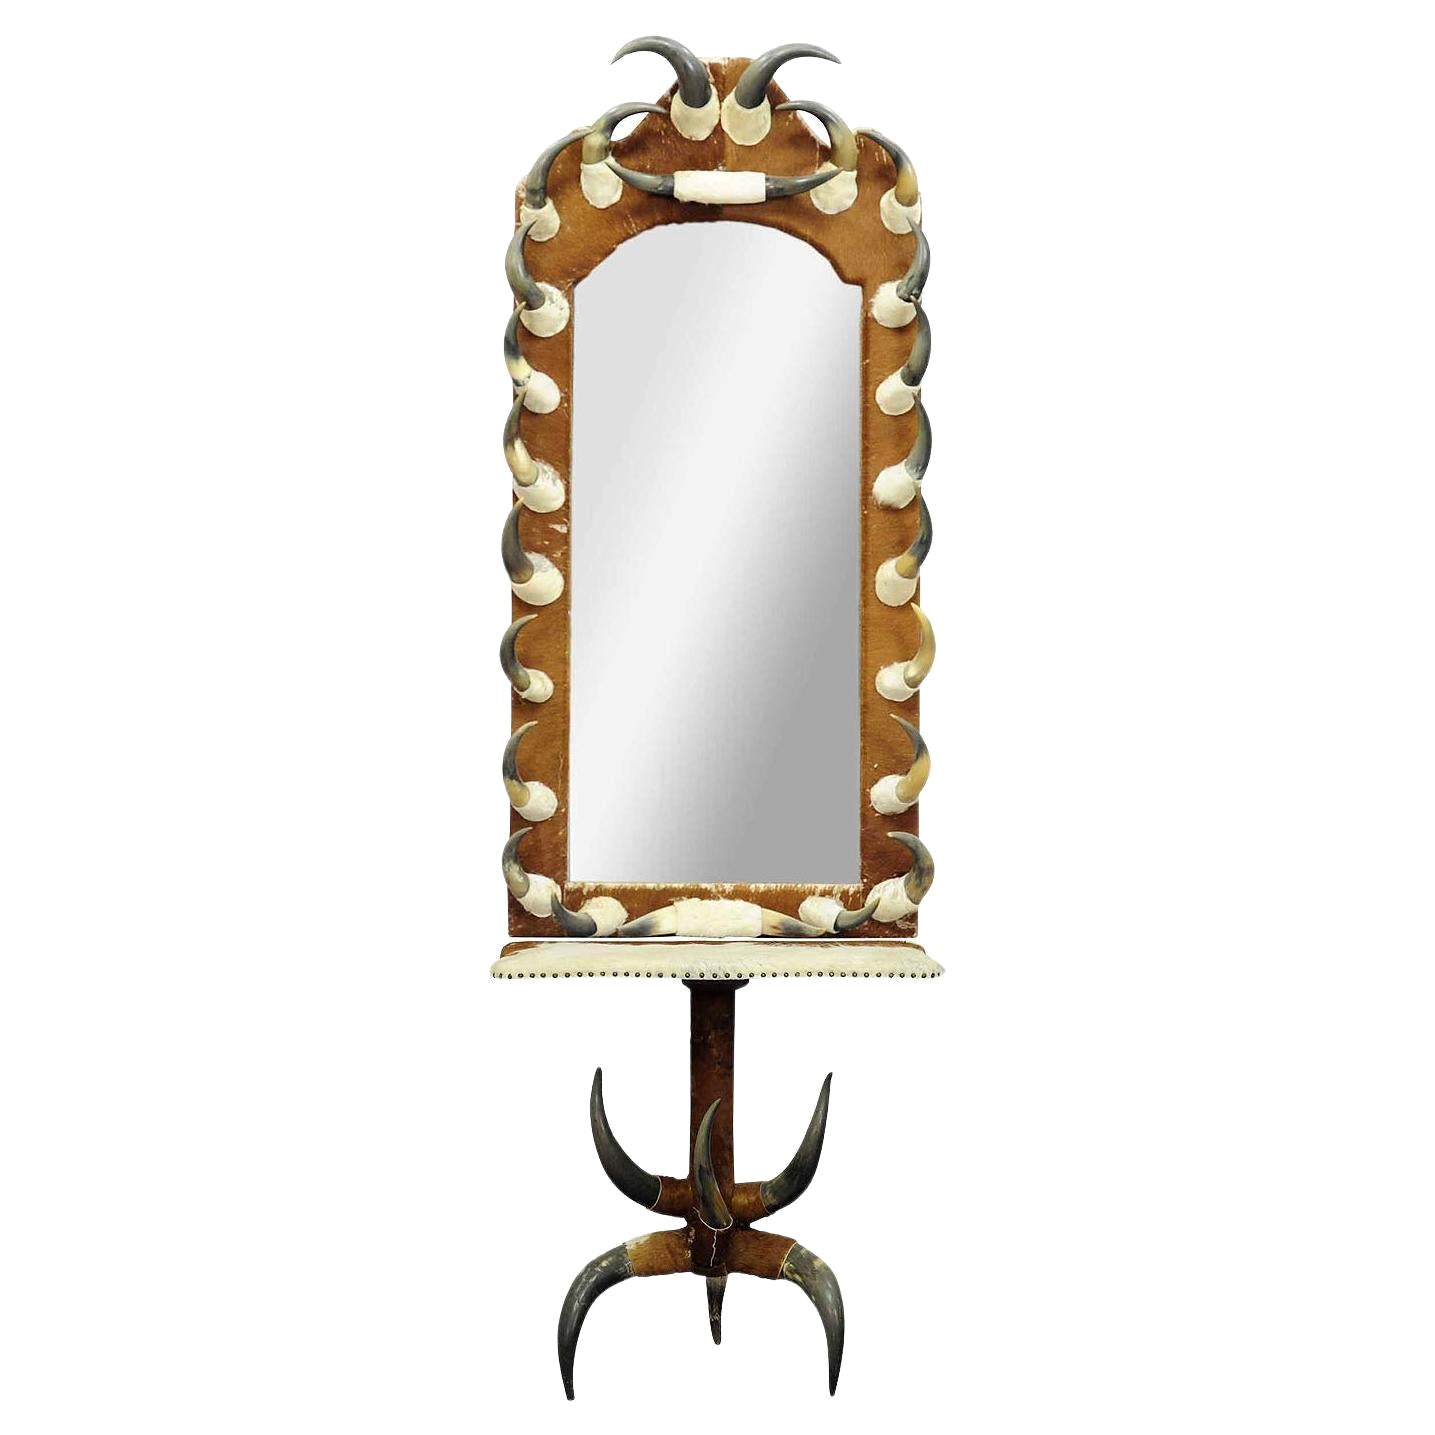 Large Hall Mirror with Cow Horn Decorations and Console Table, Austria, 1870 For Sale